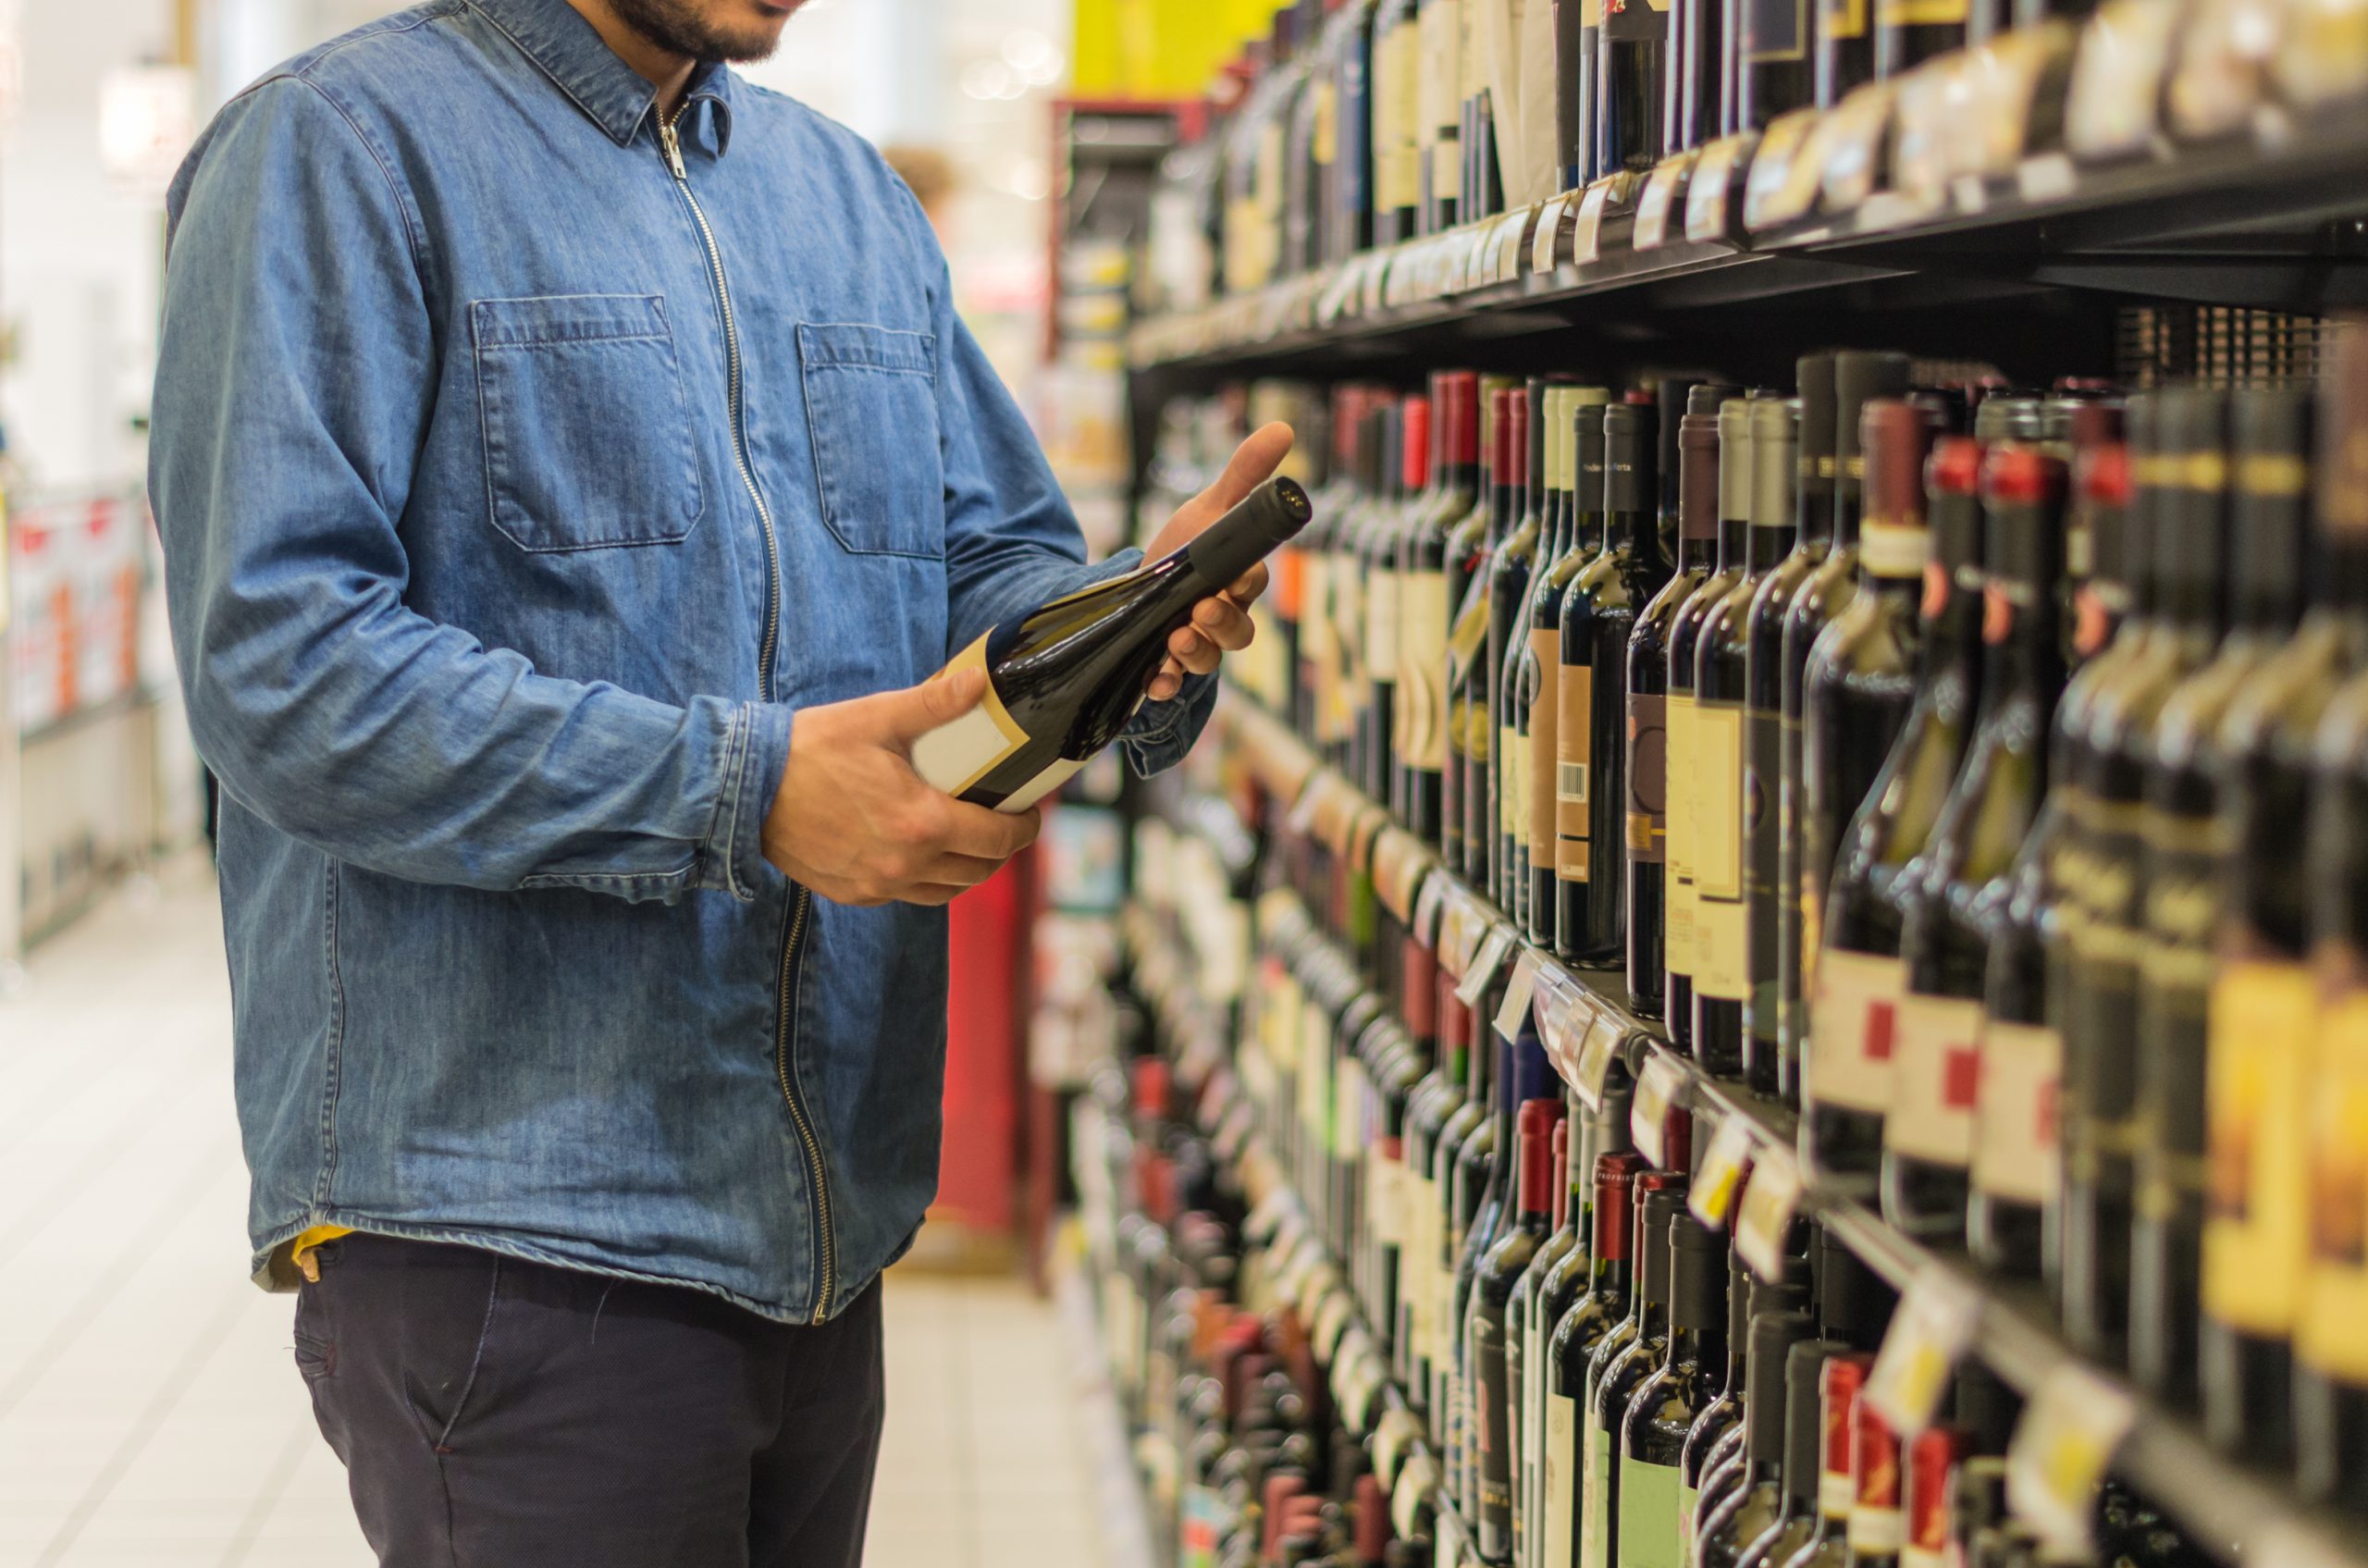 Consultation on minimum unit alcohol pricing launched